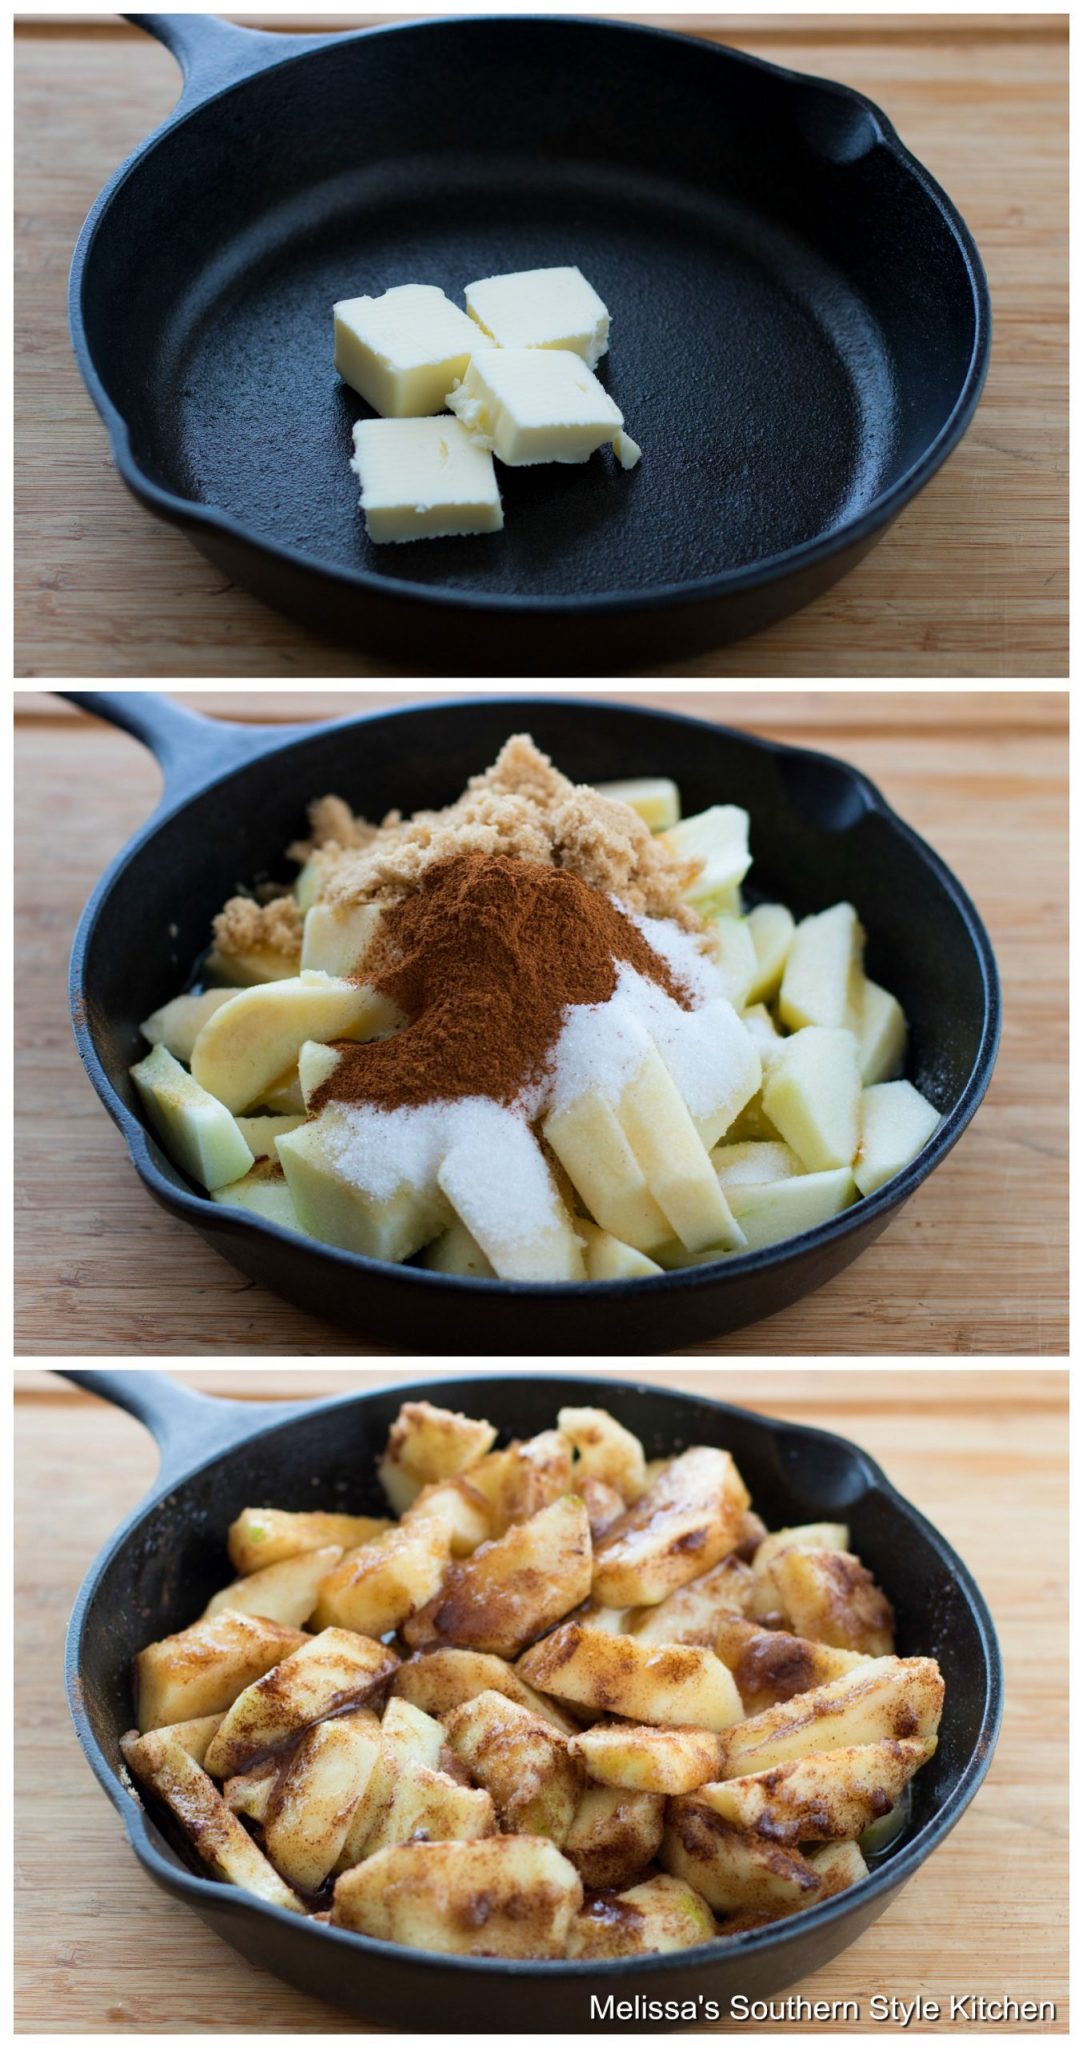 Step-by-step preparation images and ingredients for fried apples